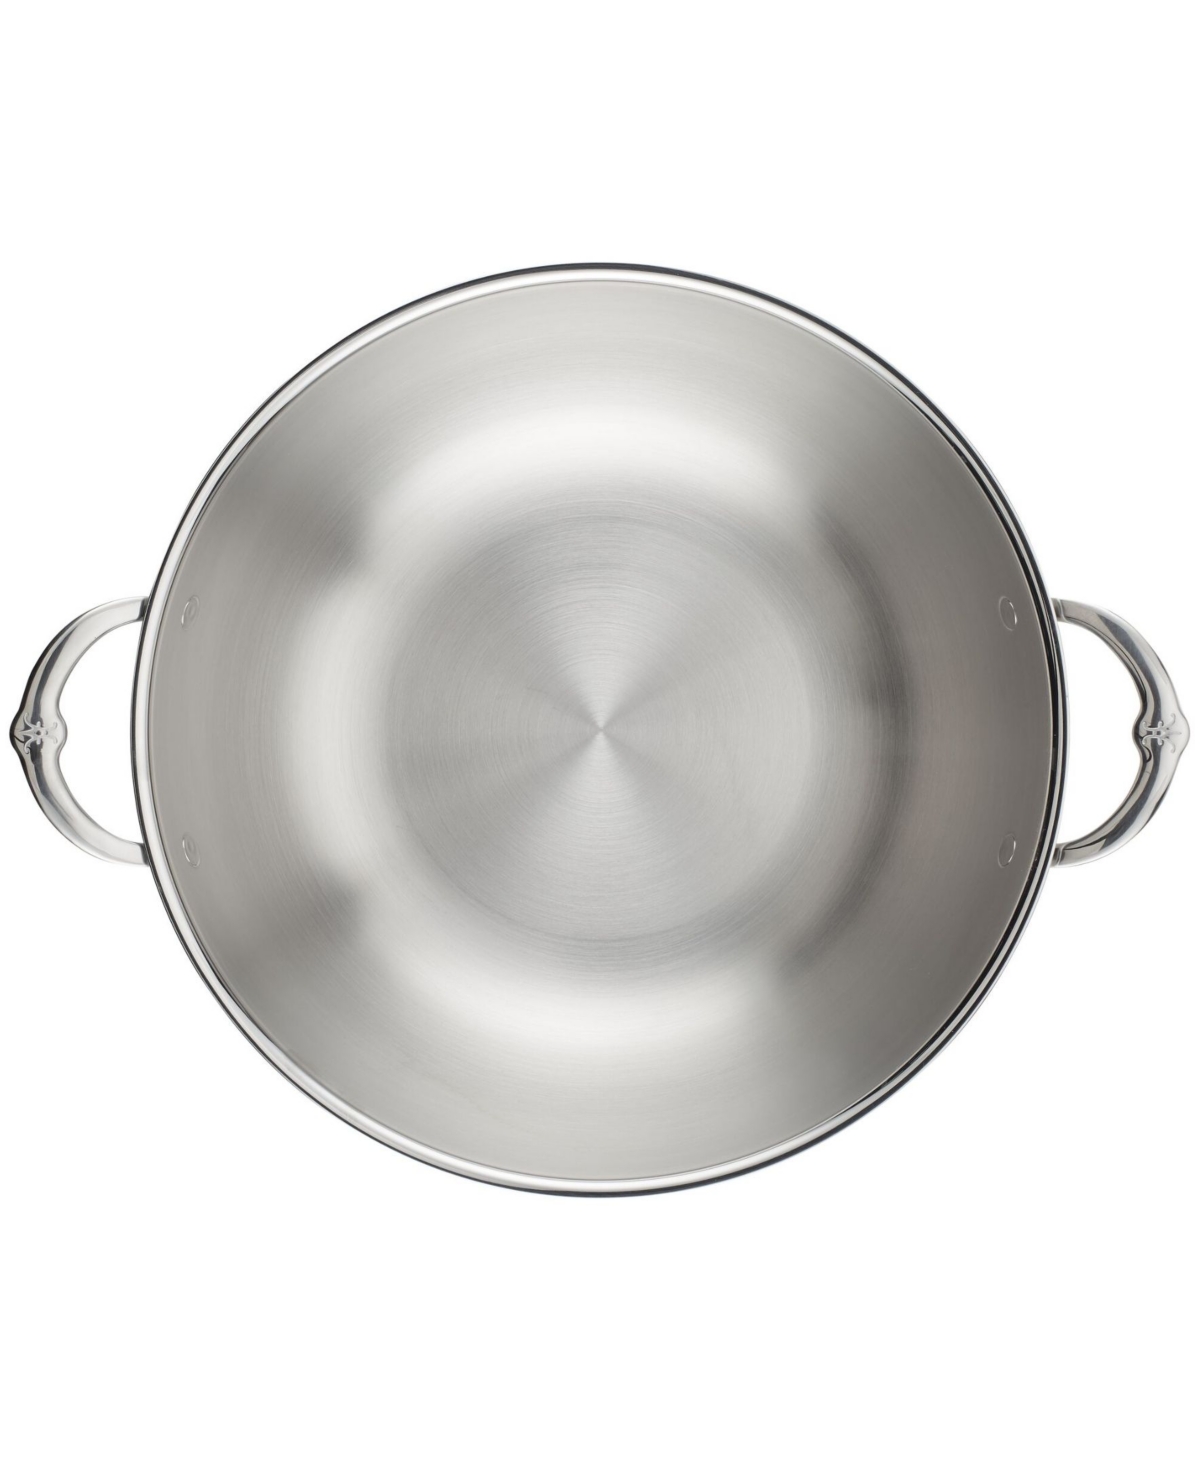 Shop Hestan Probond Clad Stainless Steel 14" Covered Wok